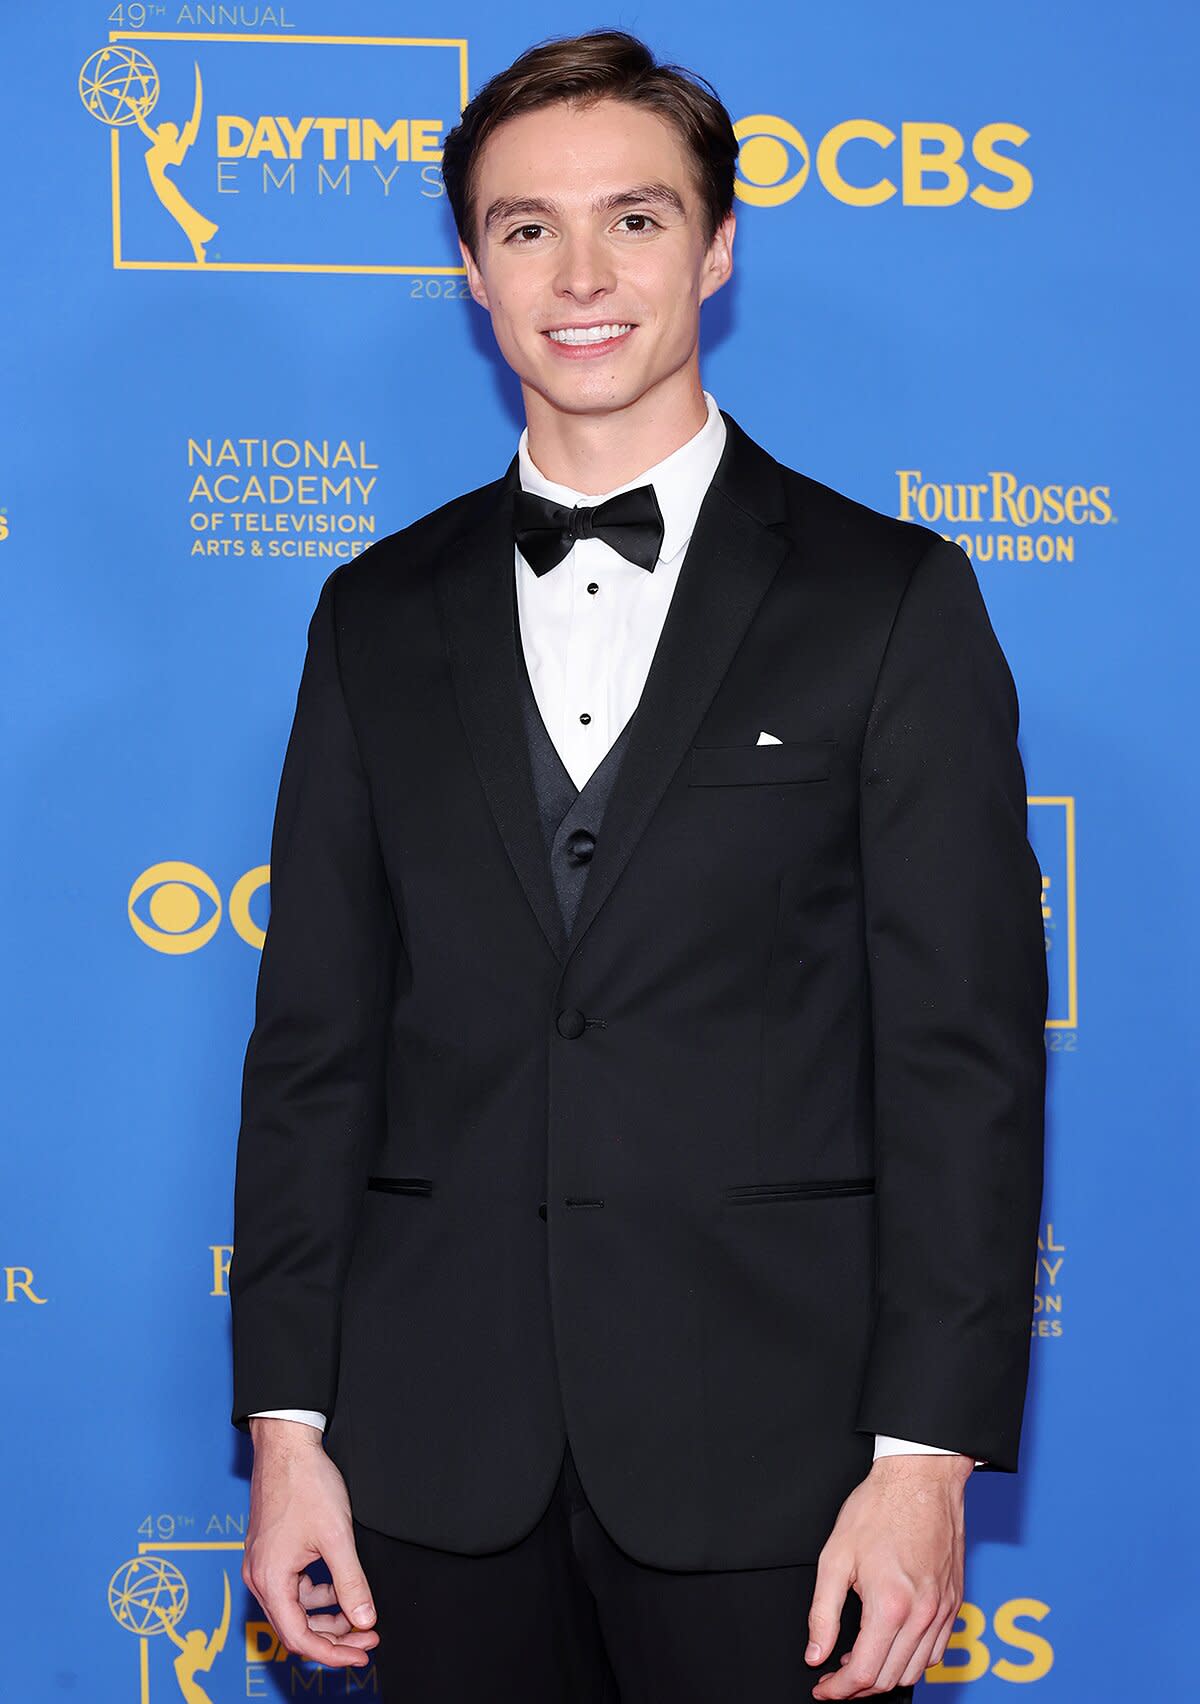 Nicholas Alexander Chavez attends the 49th Daytime Emmy Awards at Pasadena Convention Center on June 24, 2022 in Pasadena, California.